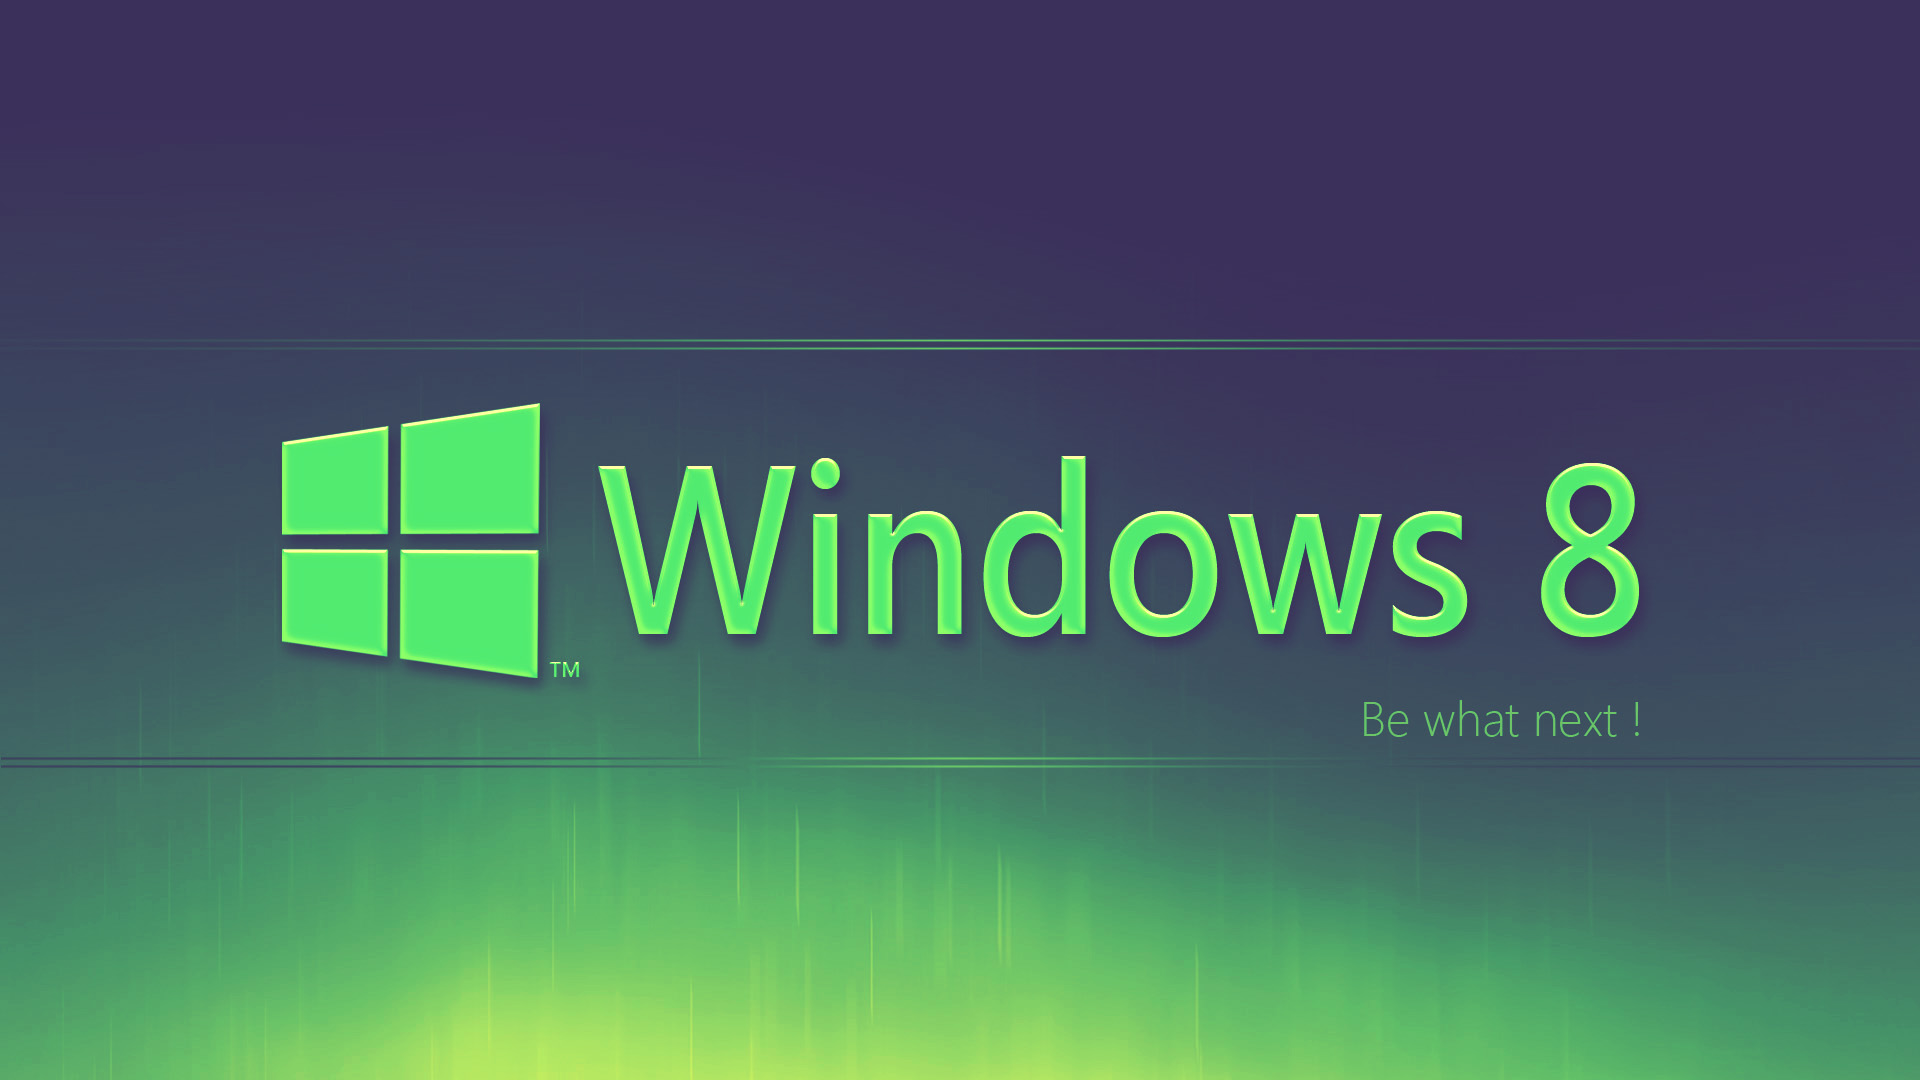 Mobile Windows 8 wallpapers Full HD Pictures